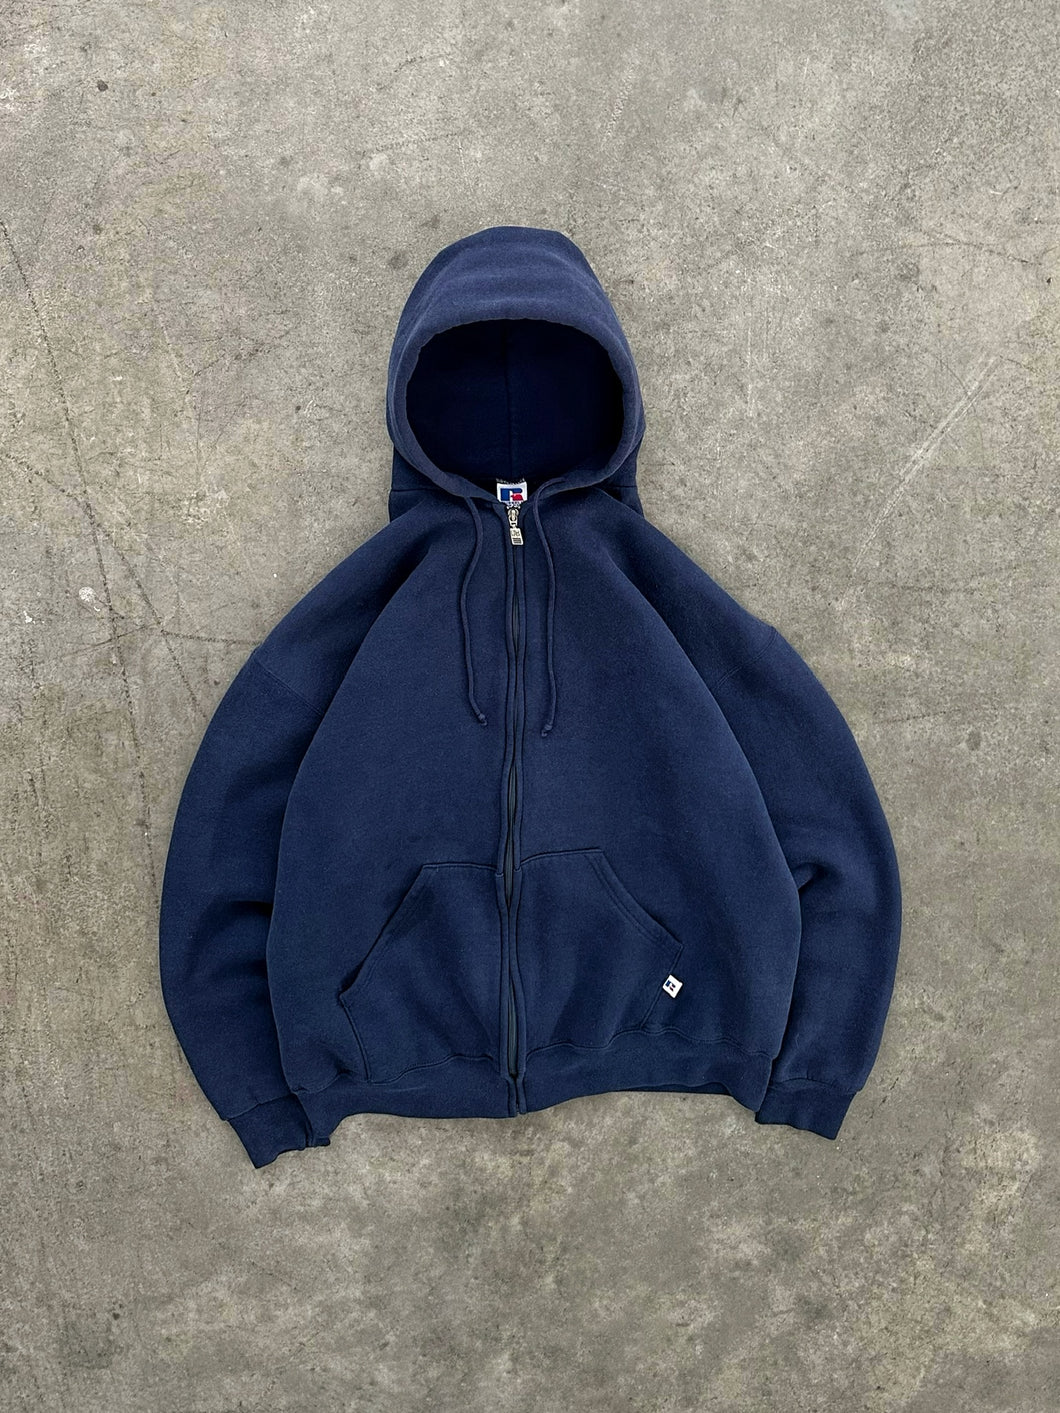 FADED NAVY BLUE ZIP UP RUSSELL HOODIE - 1990S